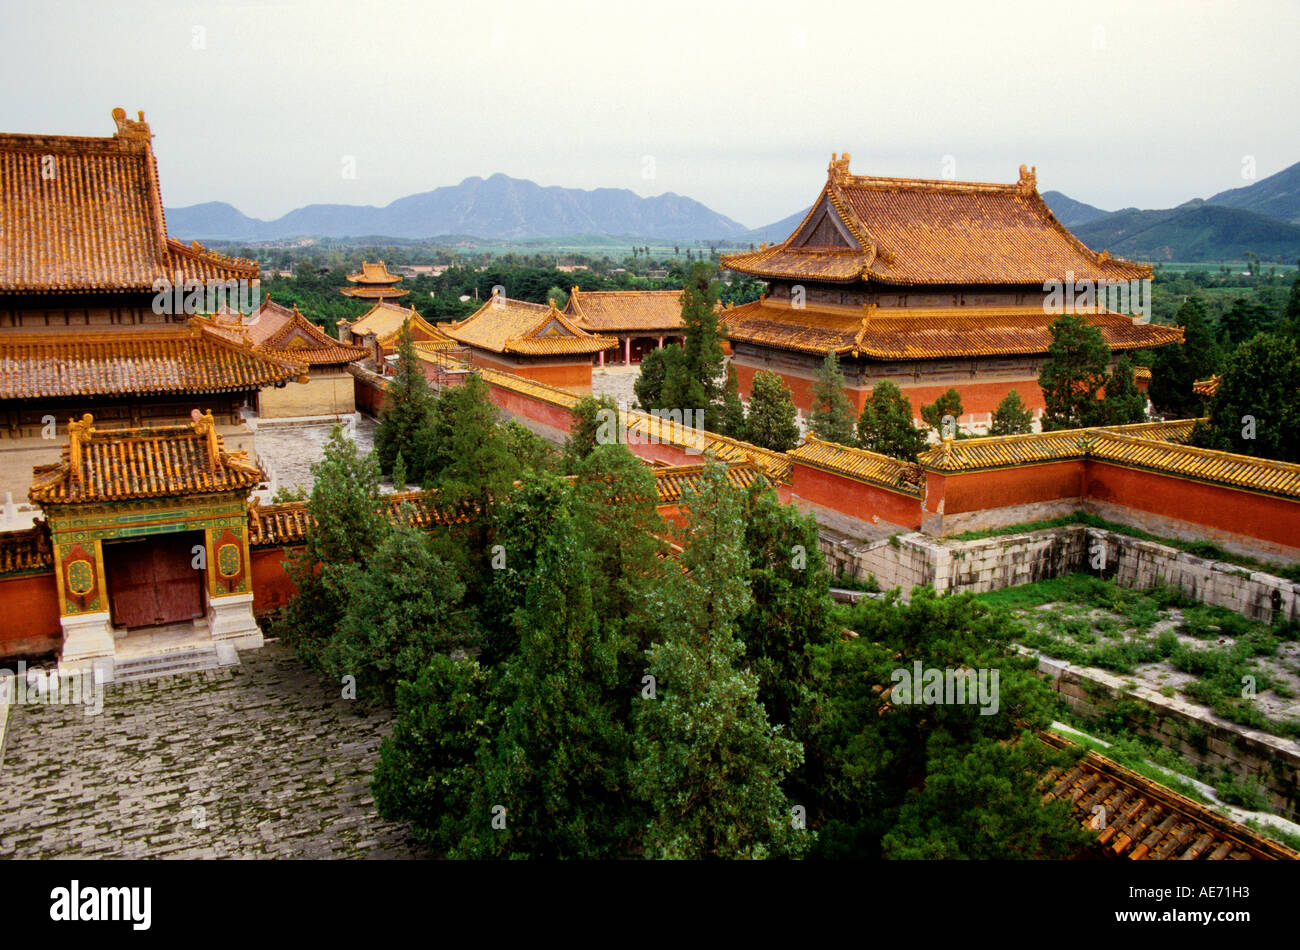 Eastern Qing Tombs complex in Hebei province, China Stock Photo